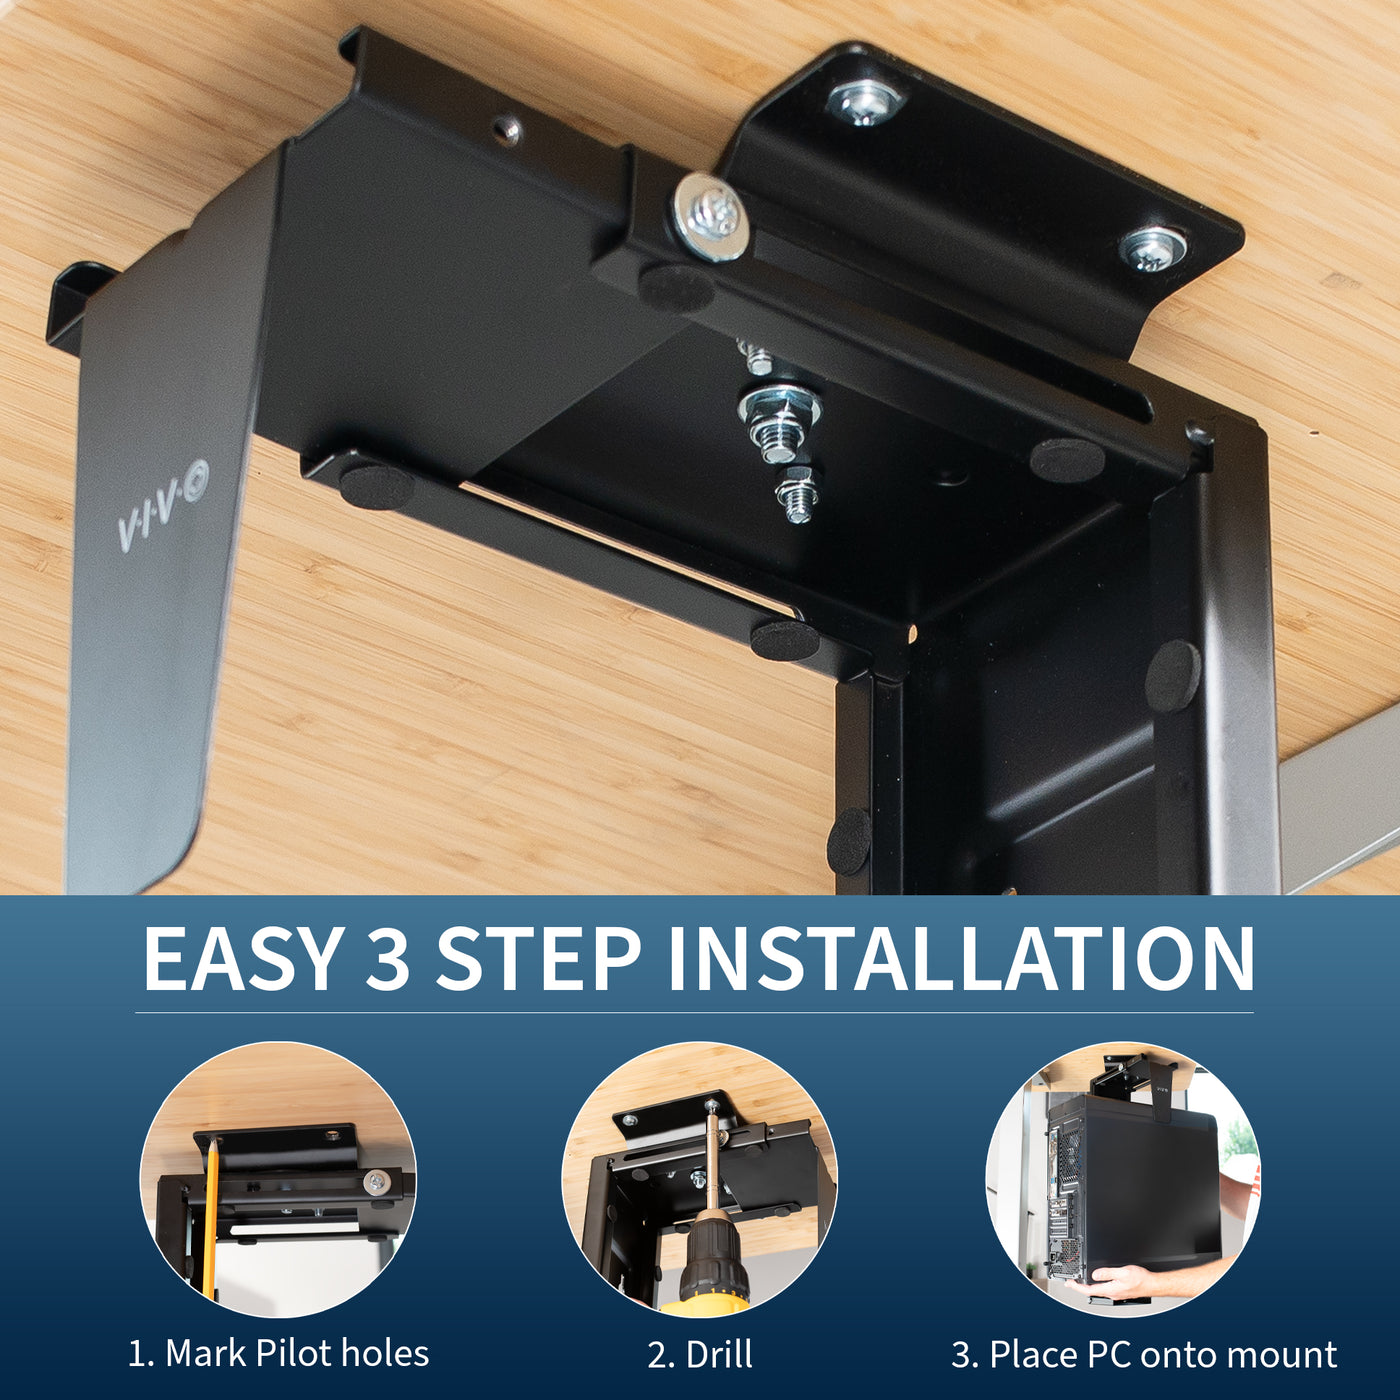 Easily install under desk or wall PC mount.